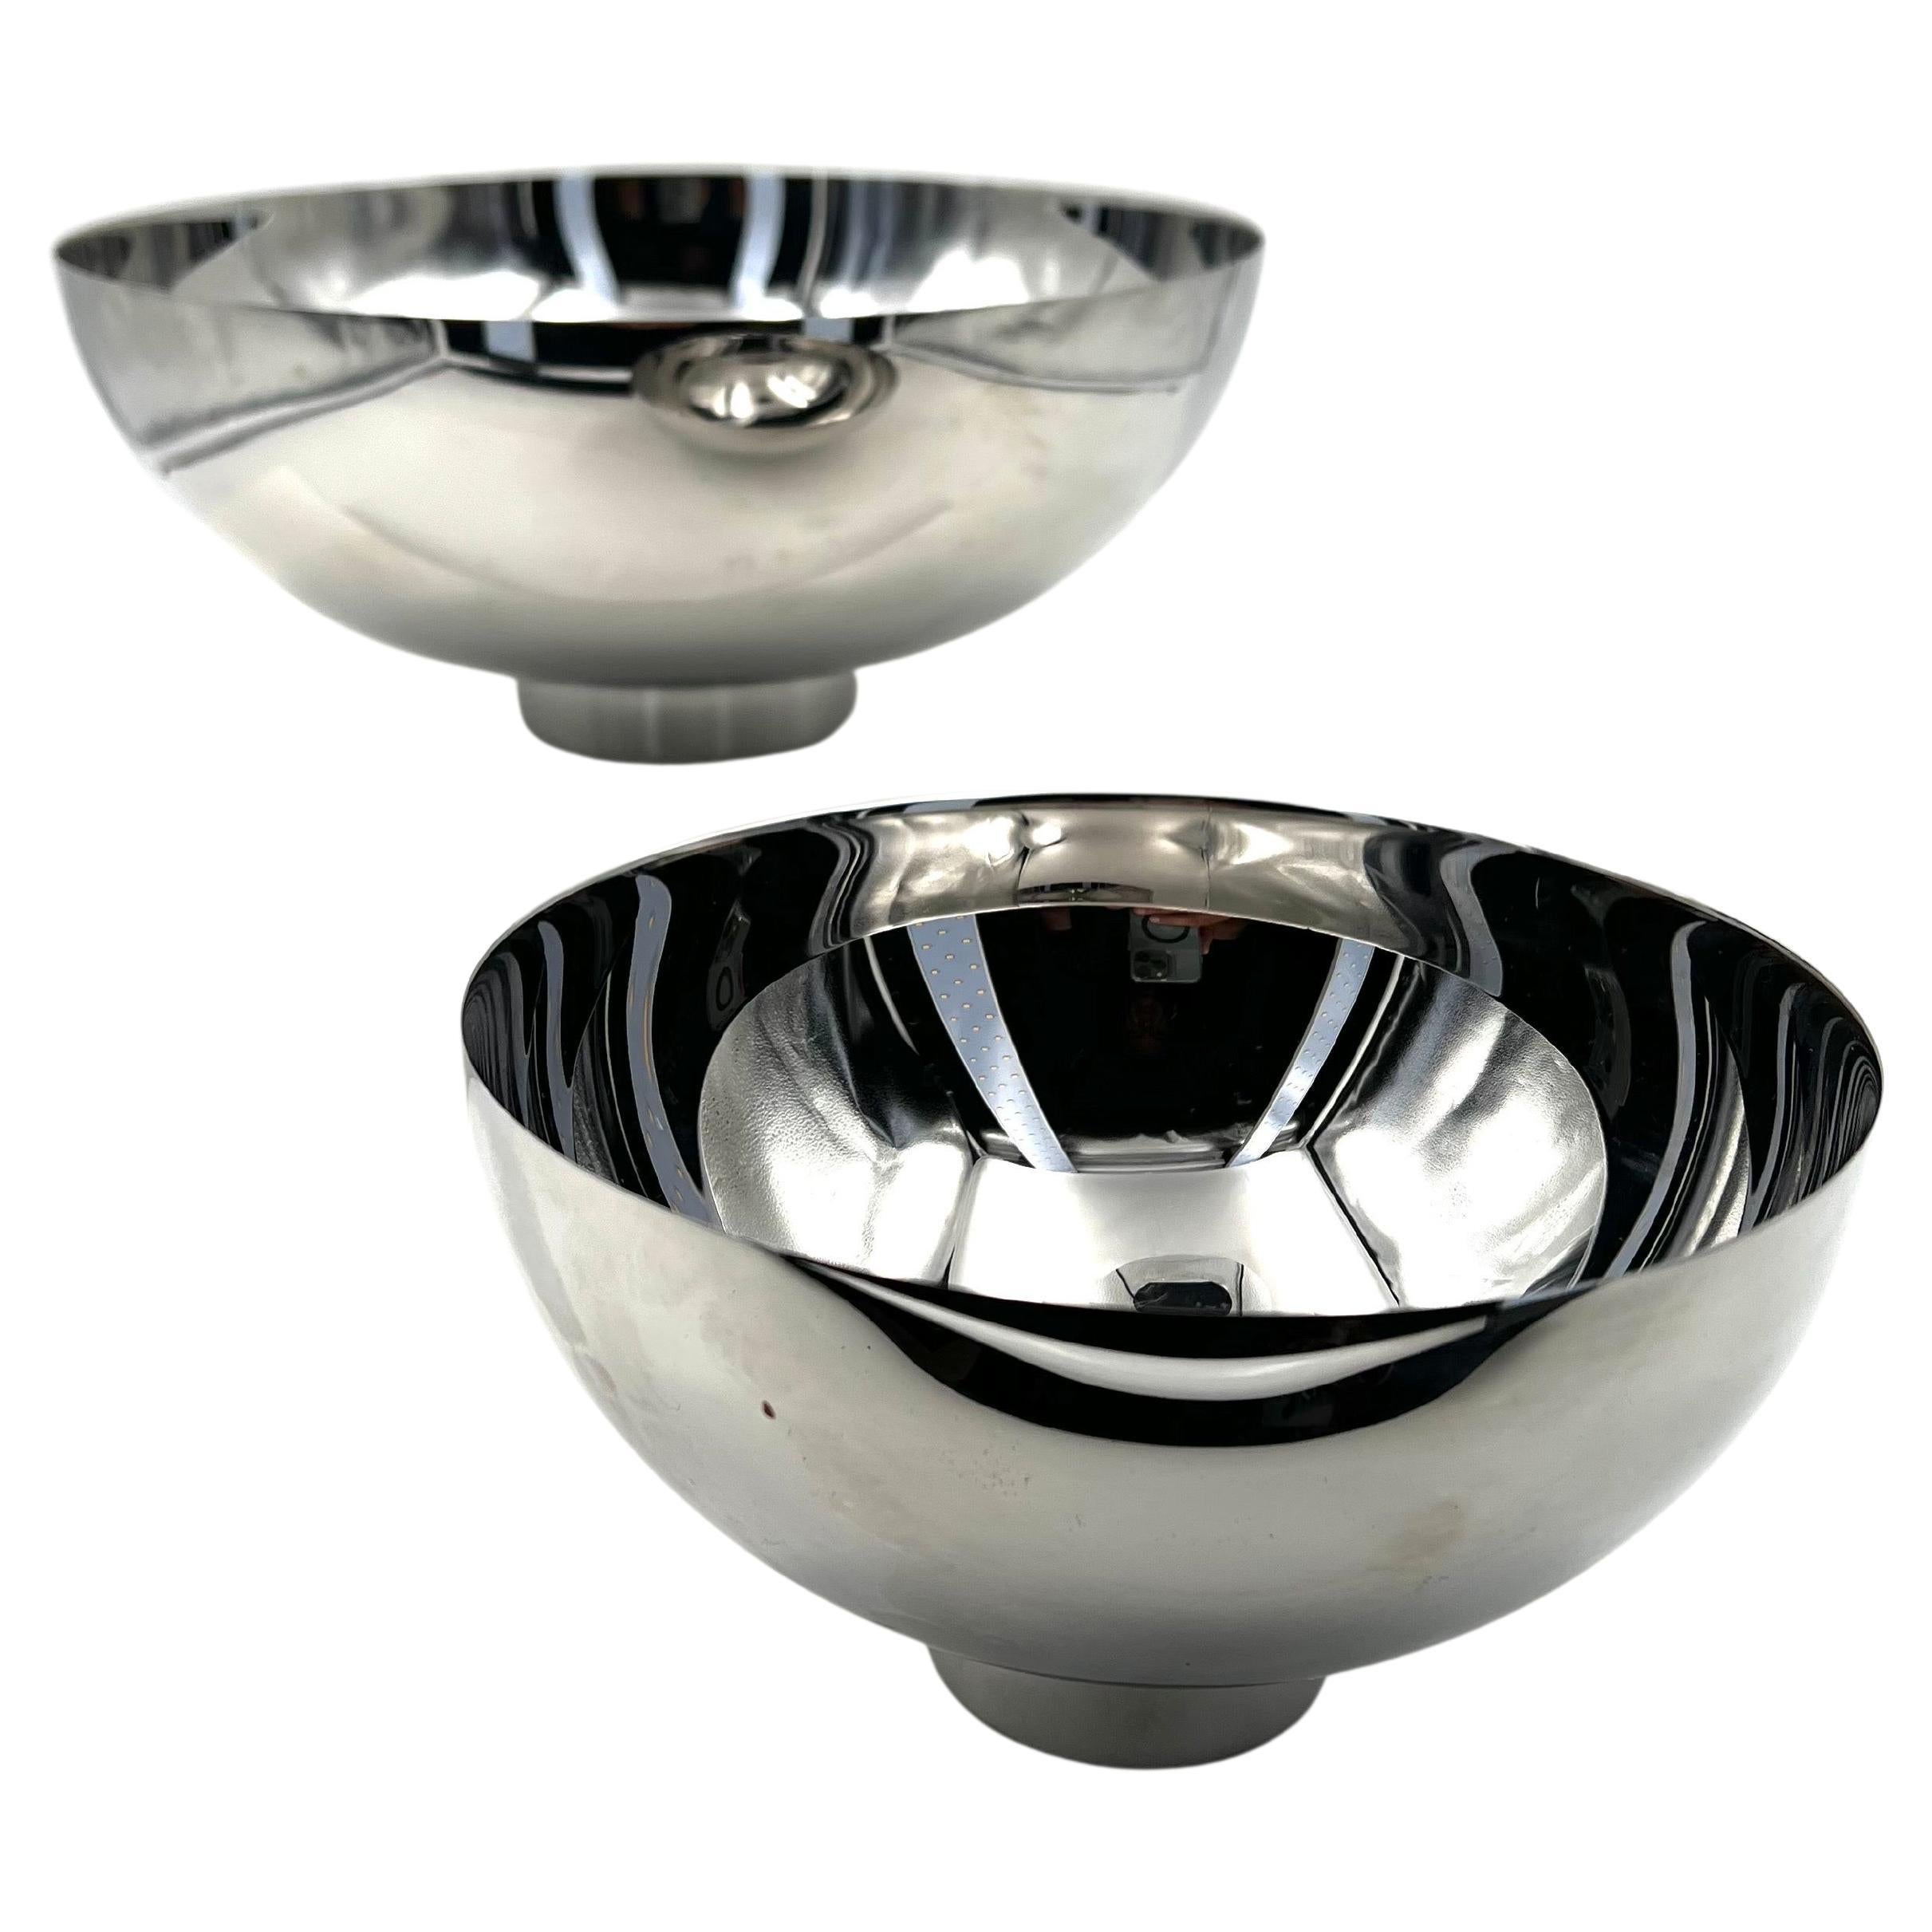 Pair of Elegant Polished Stainless Steel Footed Bowls by Georg Jensen Denmark For Sale